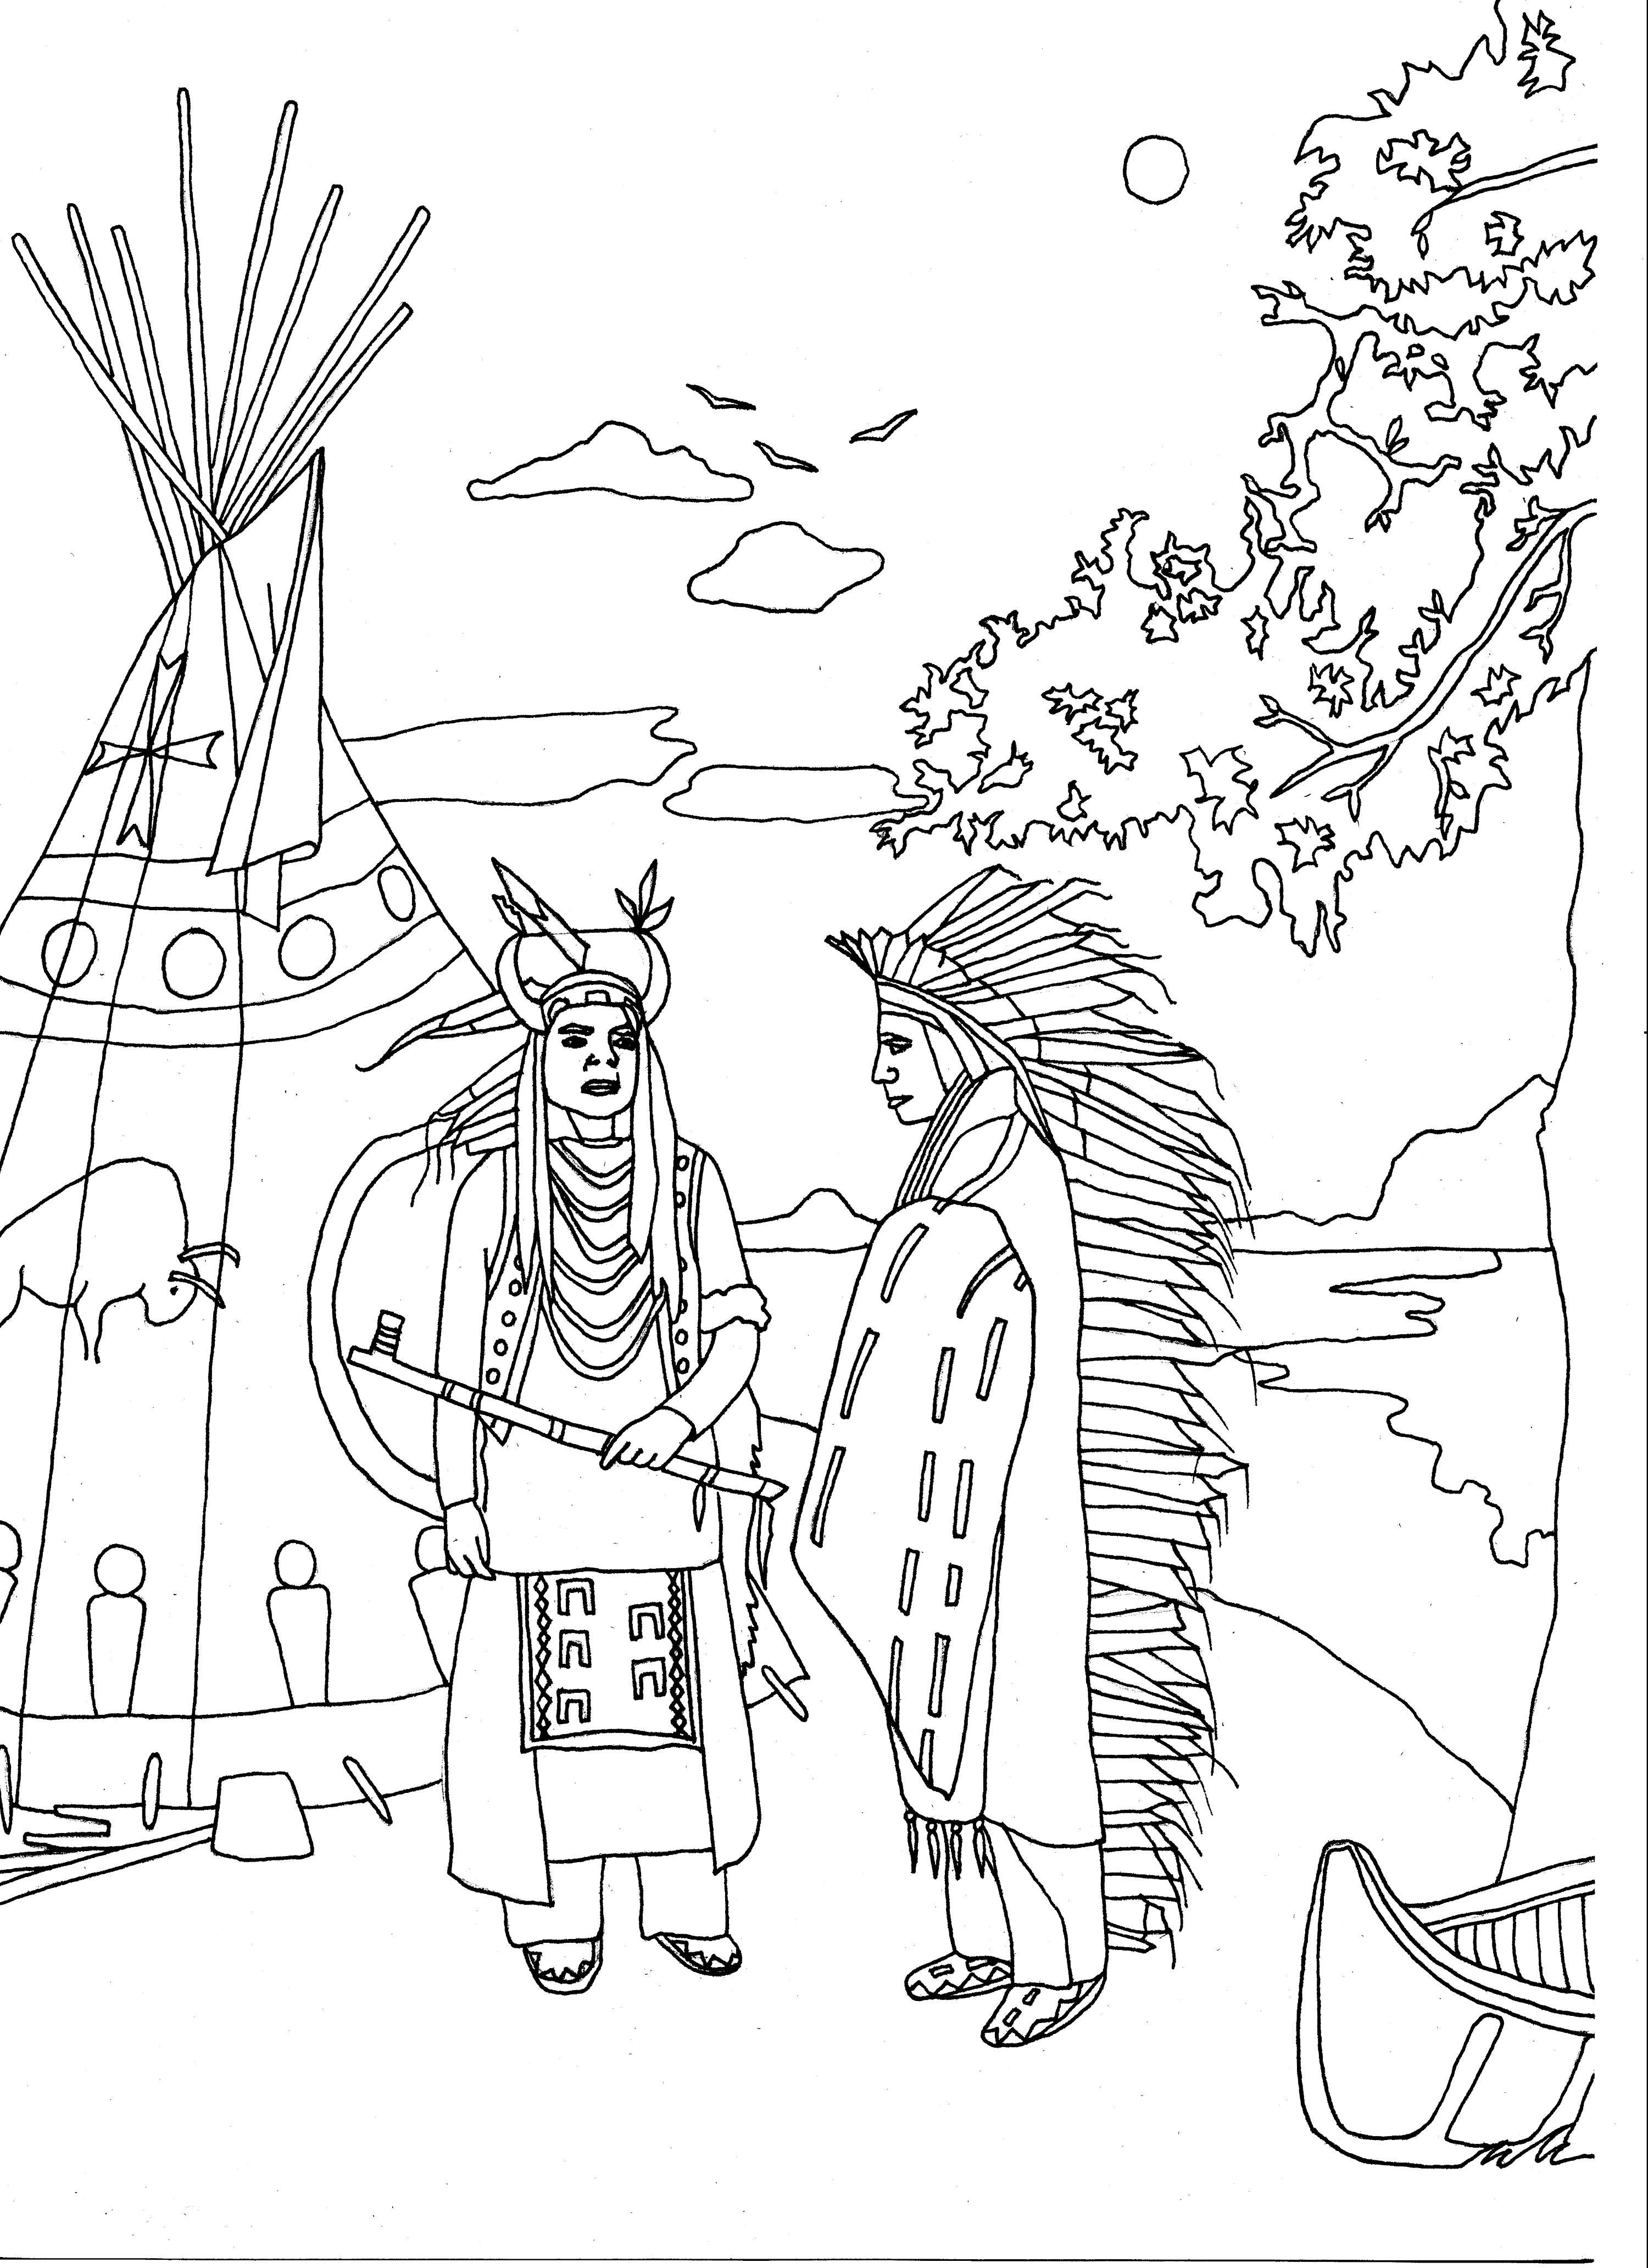 Two native americans by marion c